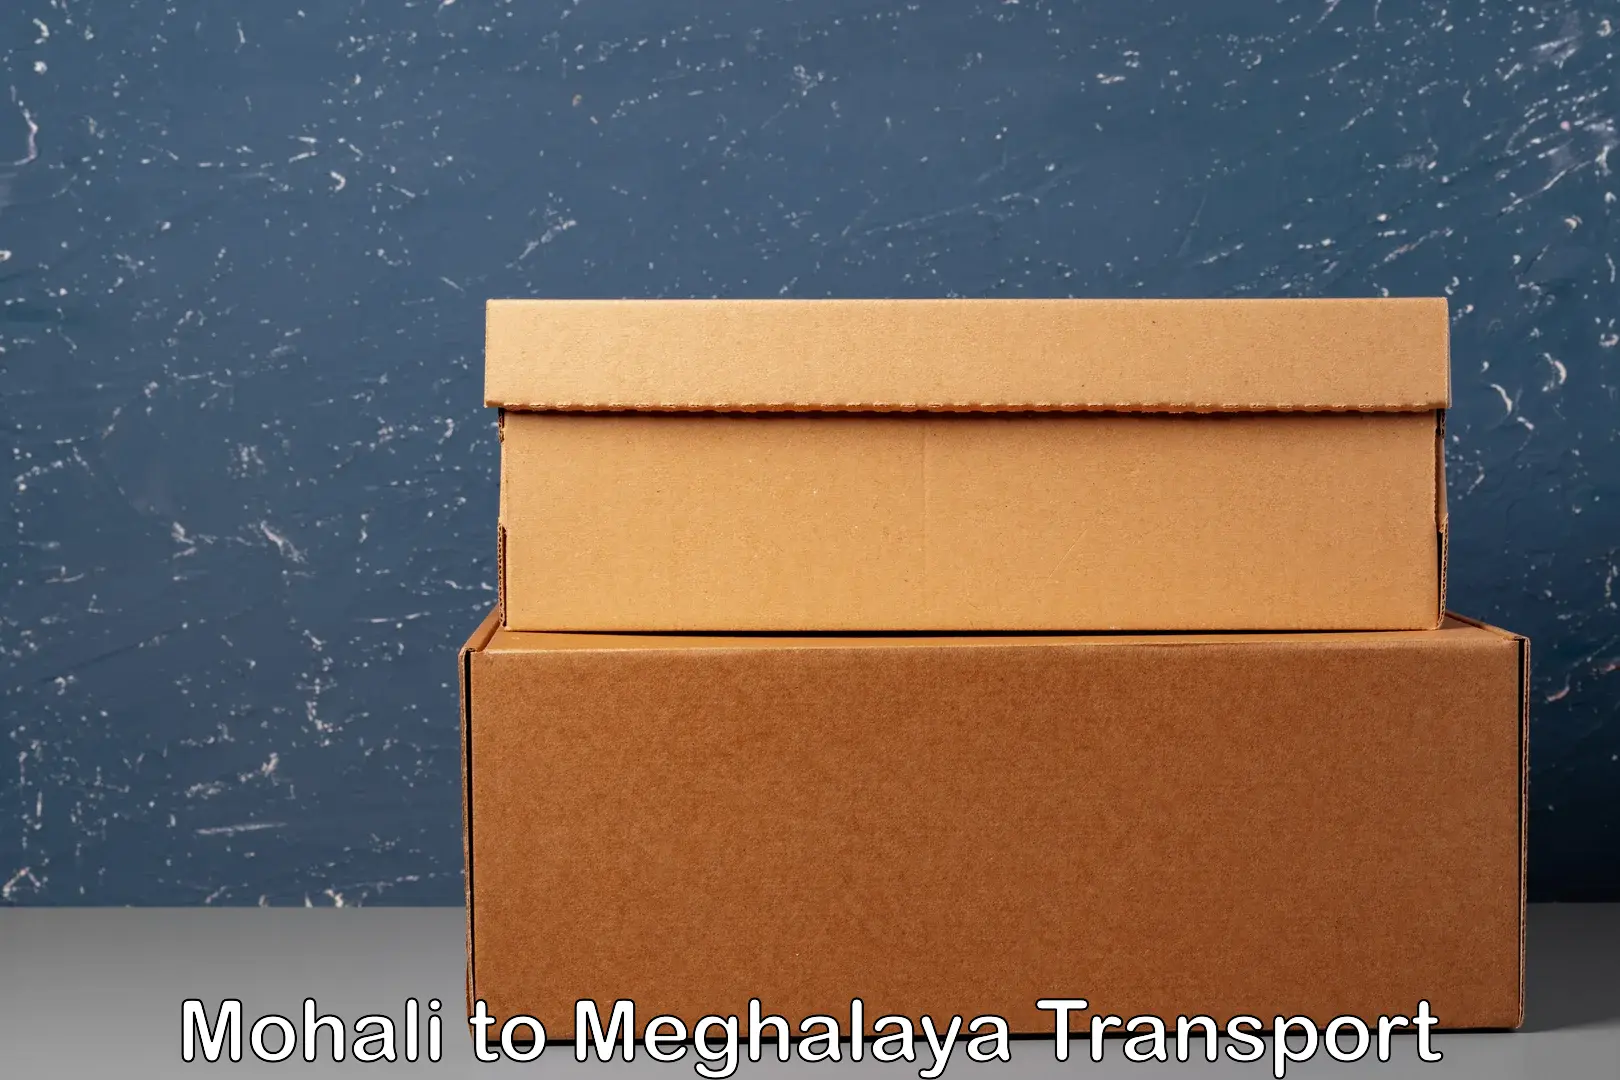 Transport bike from one state to another Mohali to Meghalaya